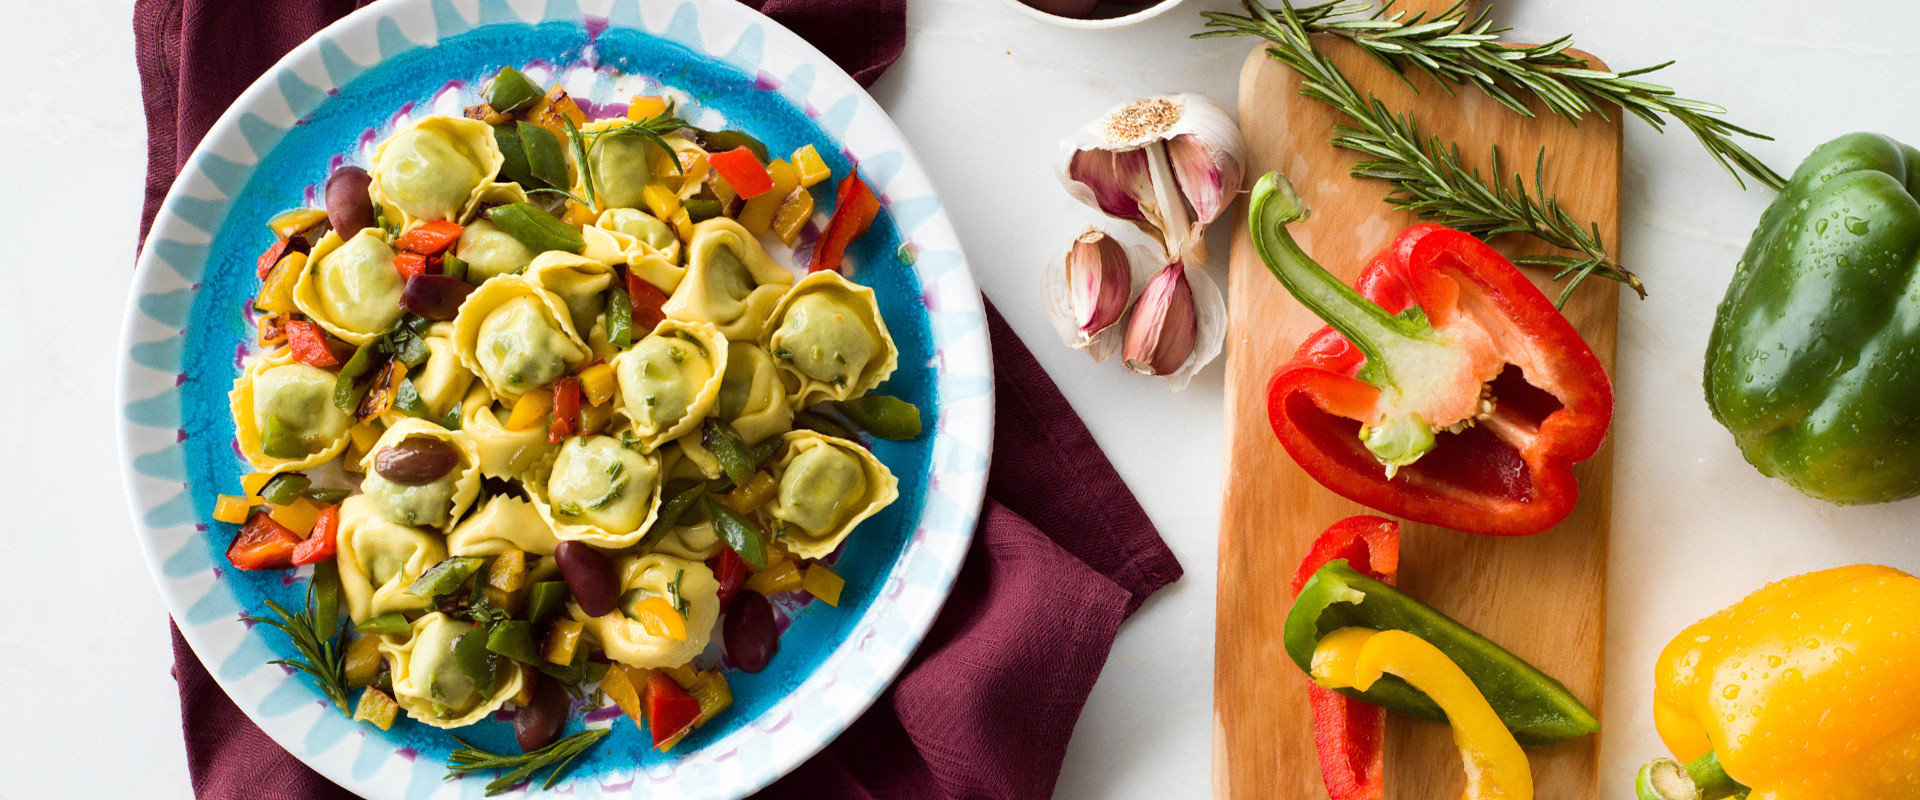 TOMATO &amp; MOZZARELLA TORTELLINI WITH PEPPERS AND OLIVES - Rana